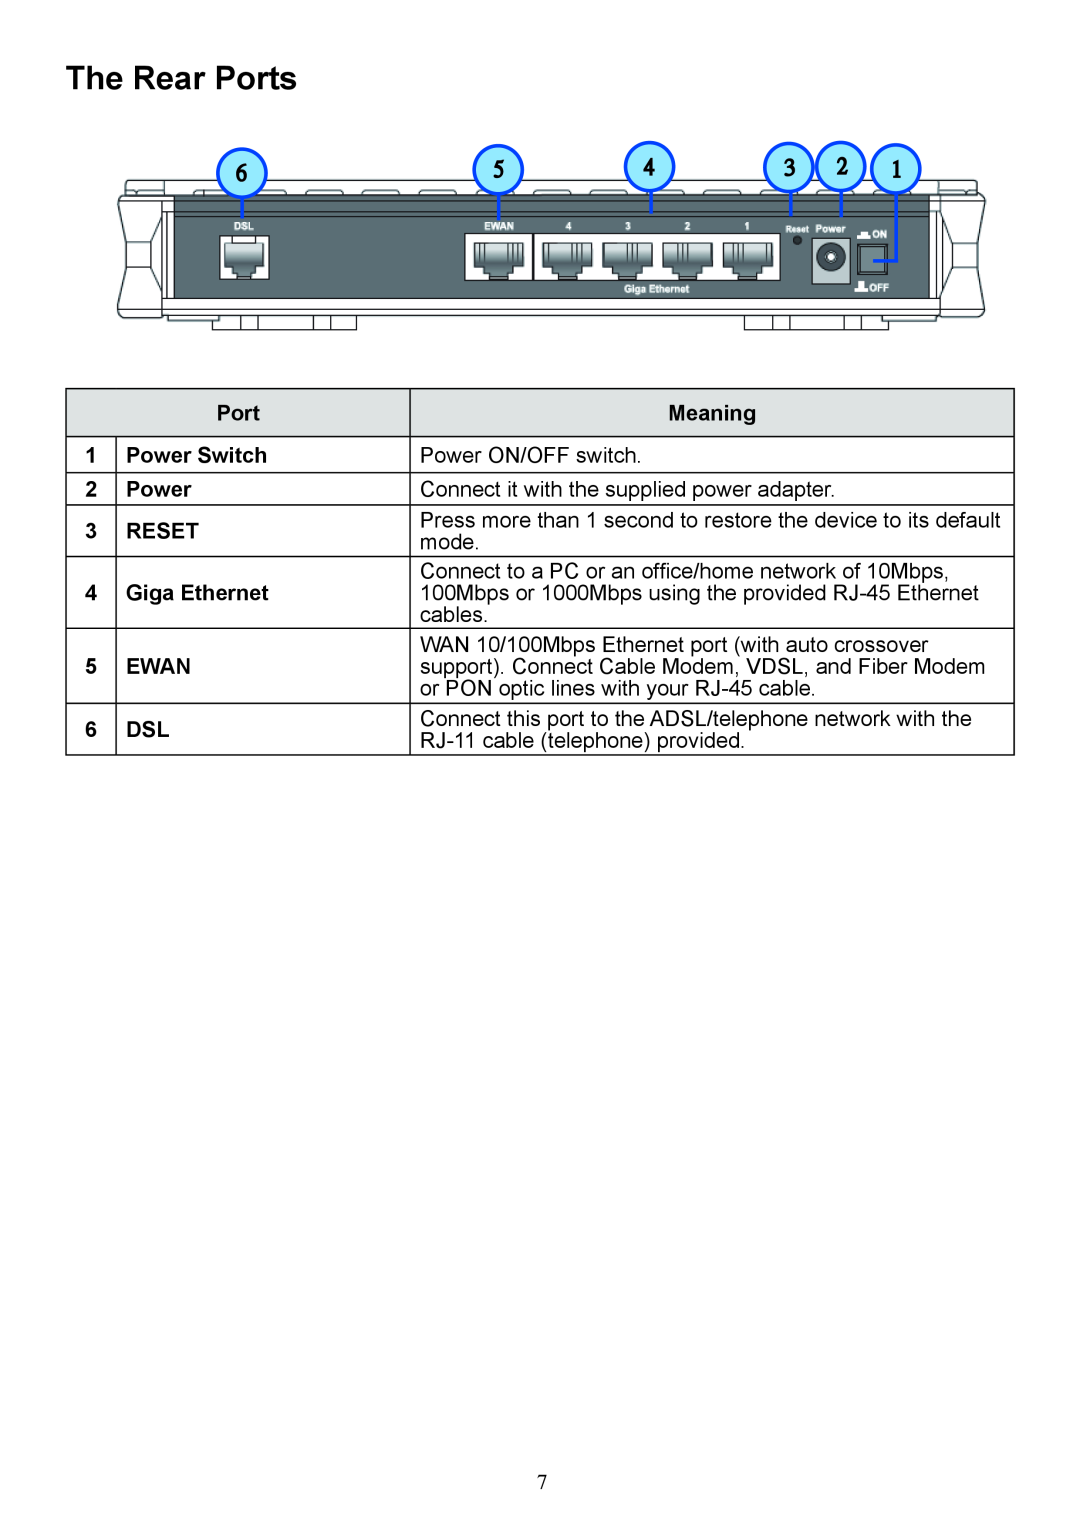 Billion Electric Company 7800 user manual The Rear Ports, Meaning, Power Switch, Reset, Giga Ethernet, Ewan 